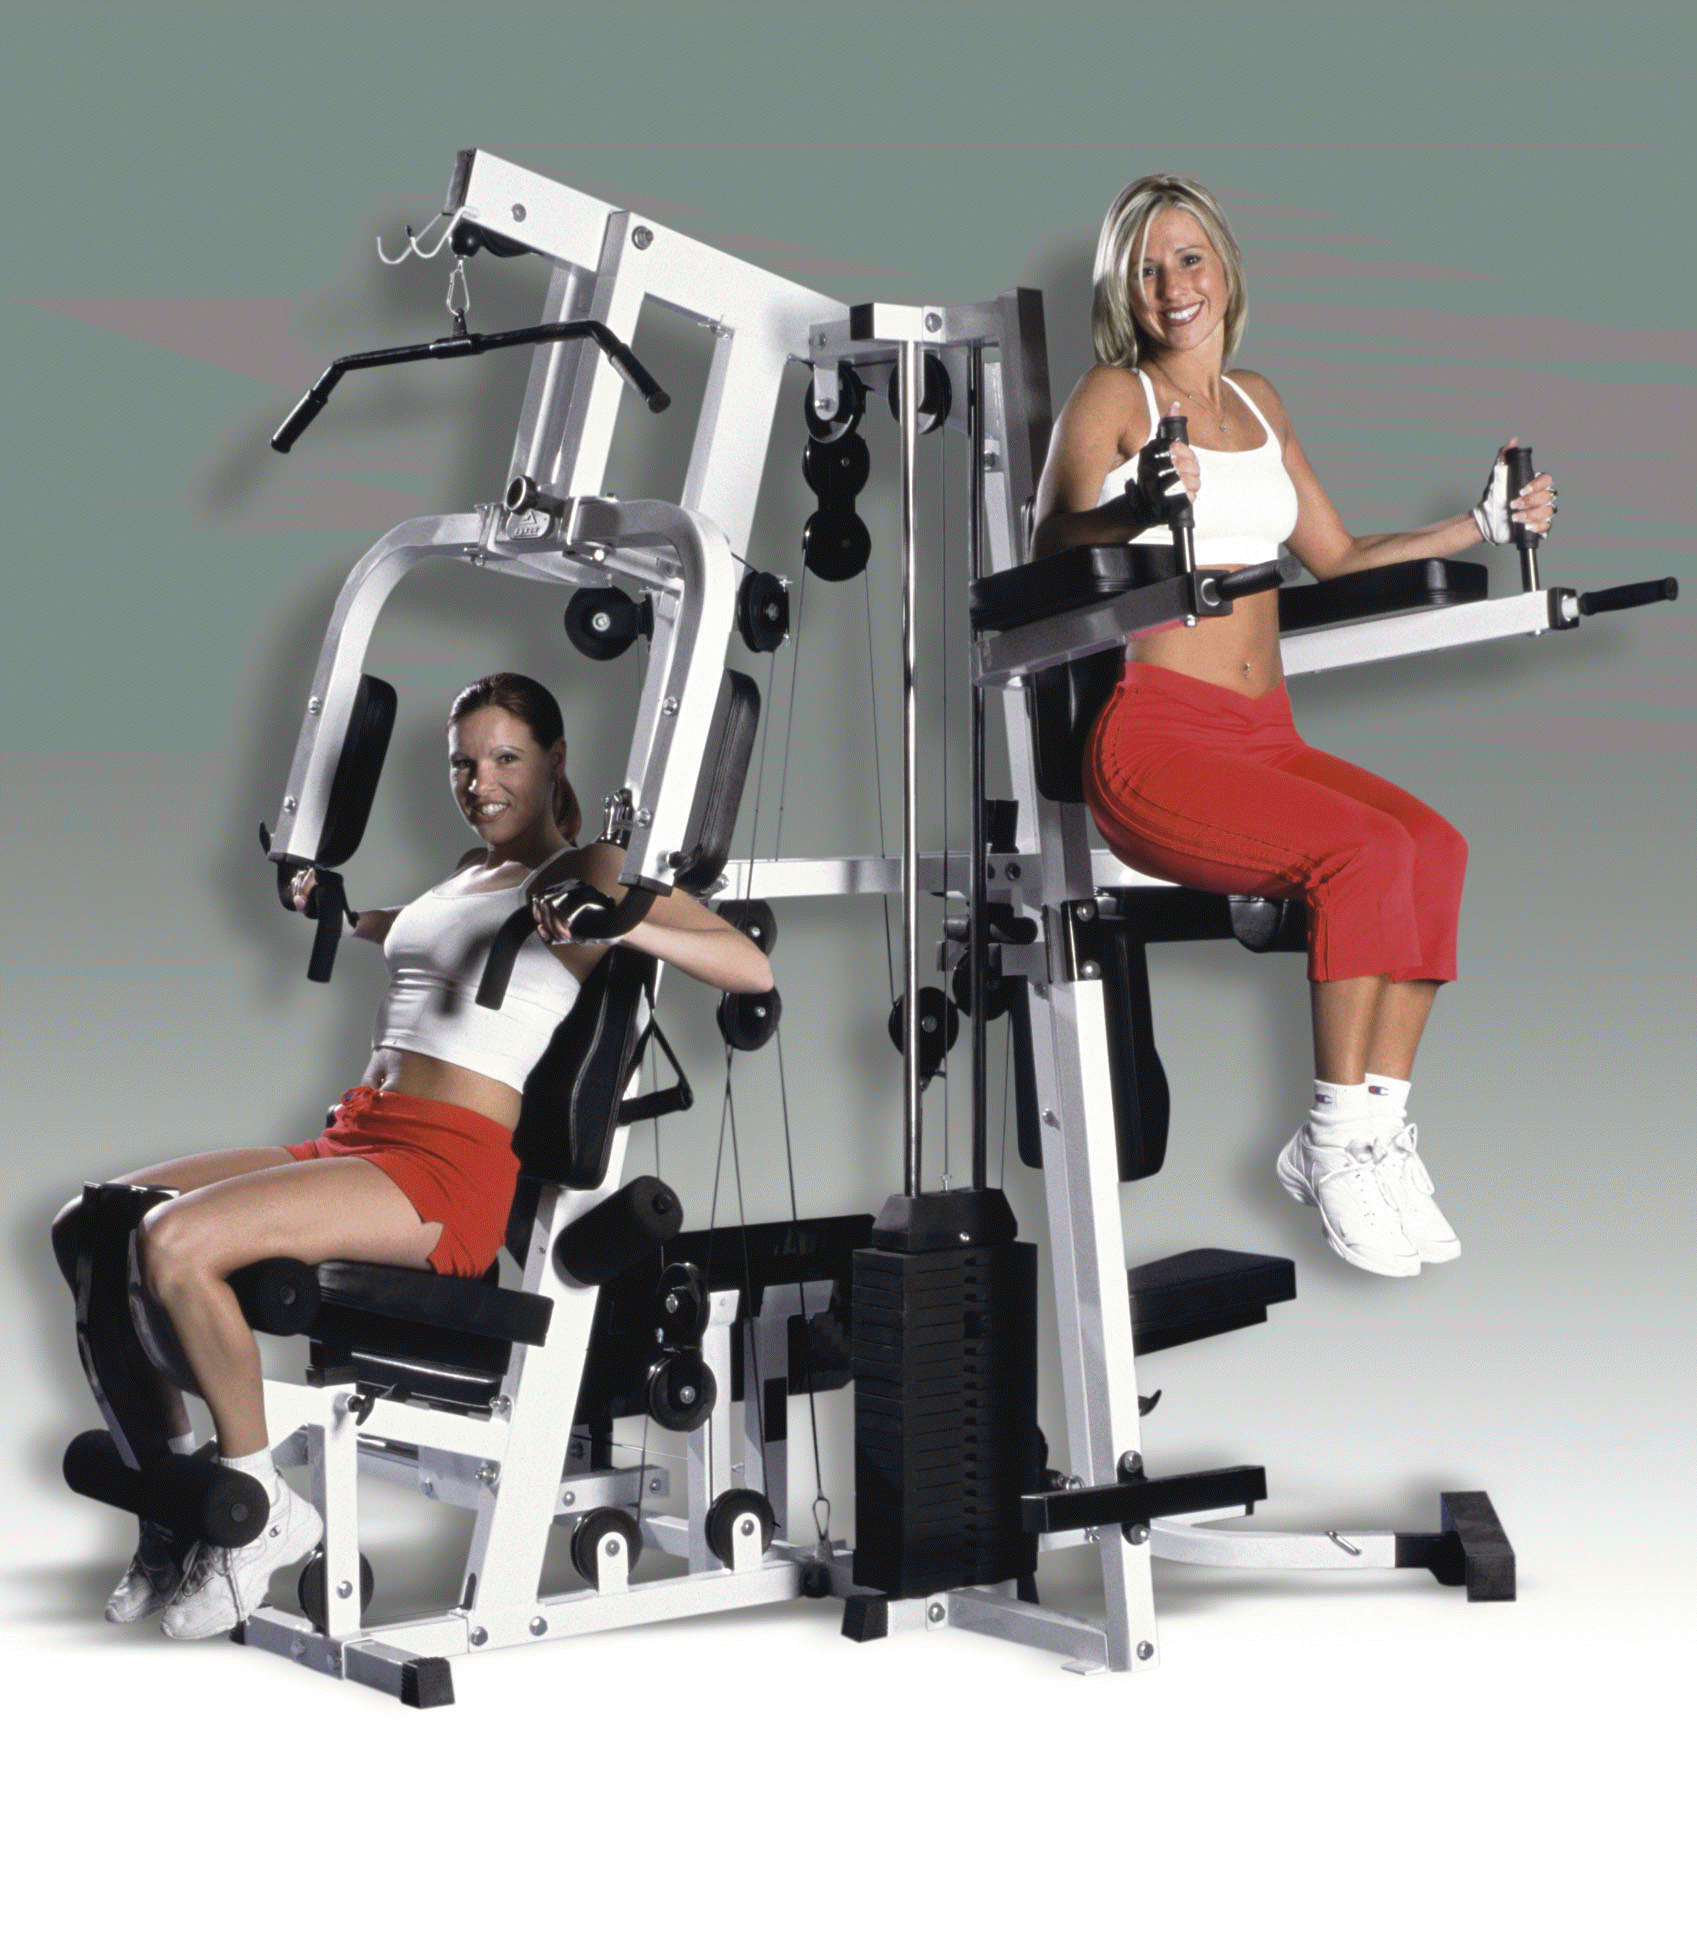 equipments of gym